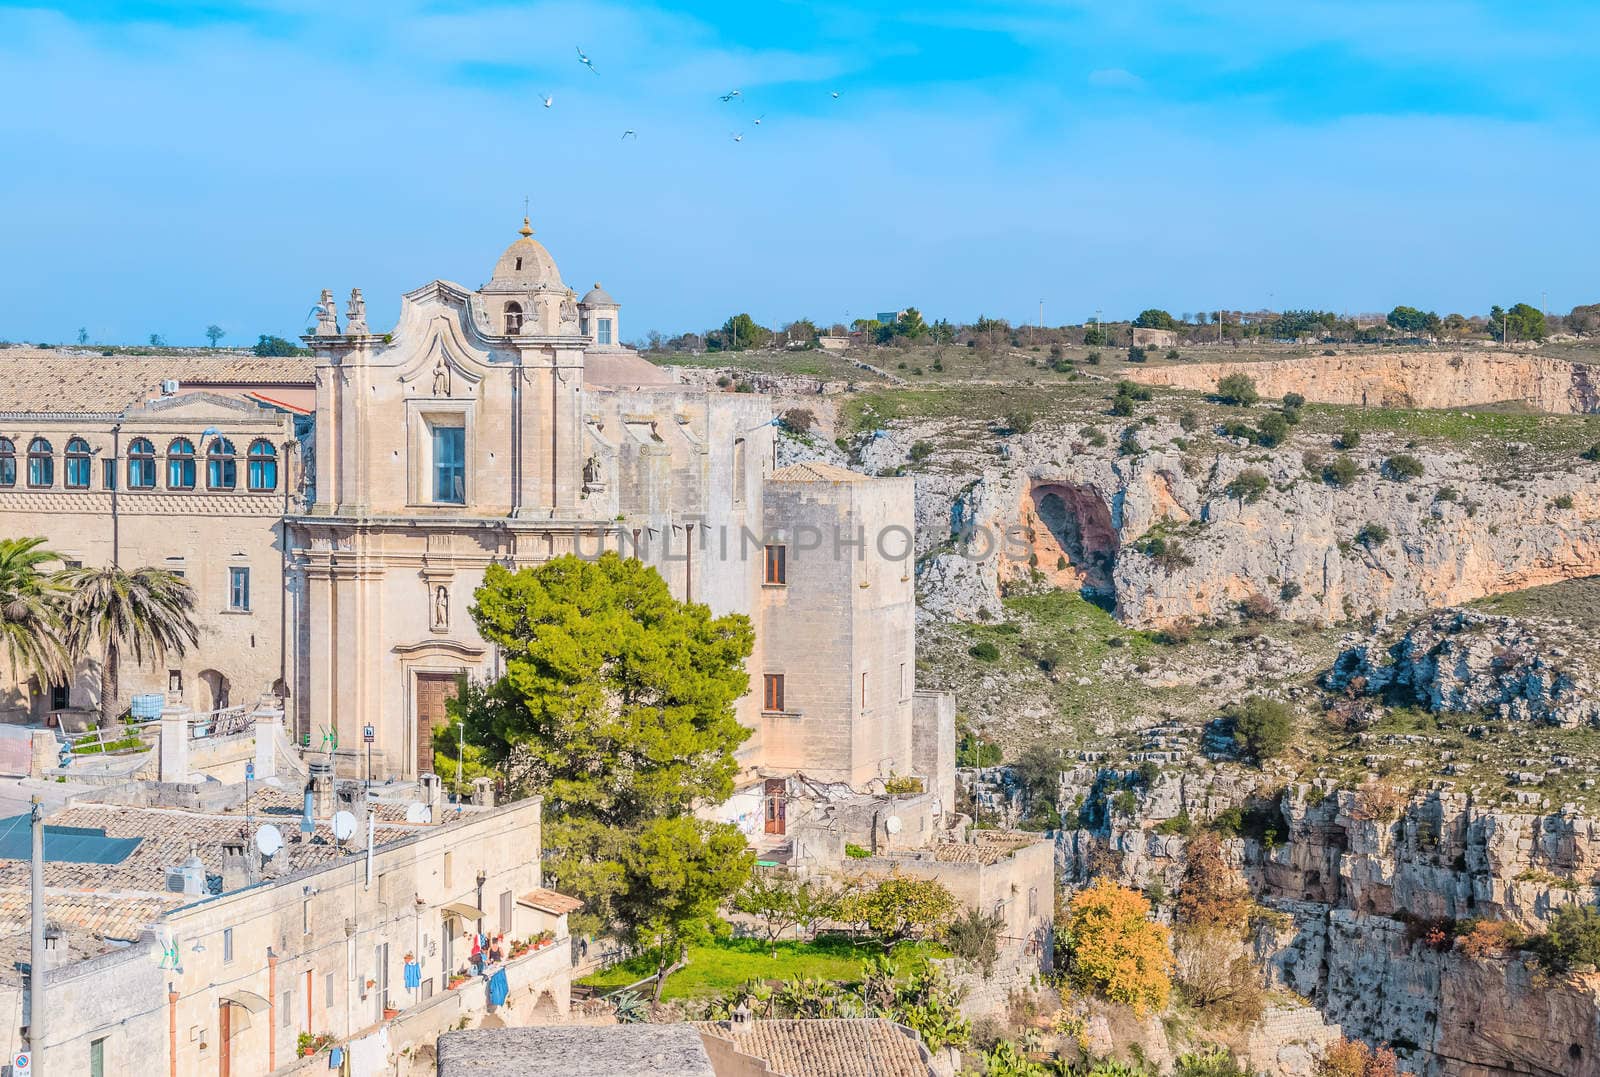 Church of St. Agostino. Matera in Italy UNESCO European Capital of Culture 2019 under blue sky